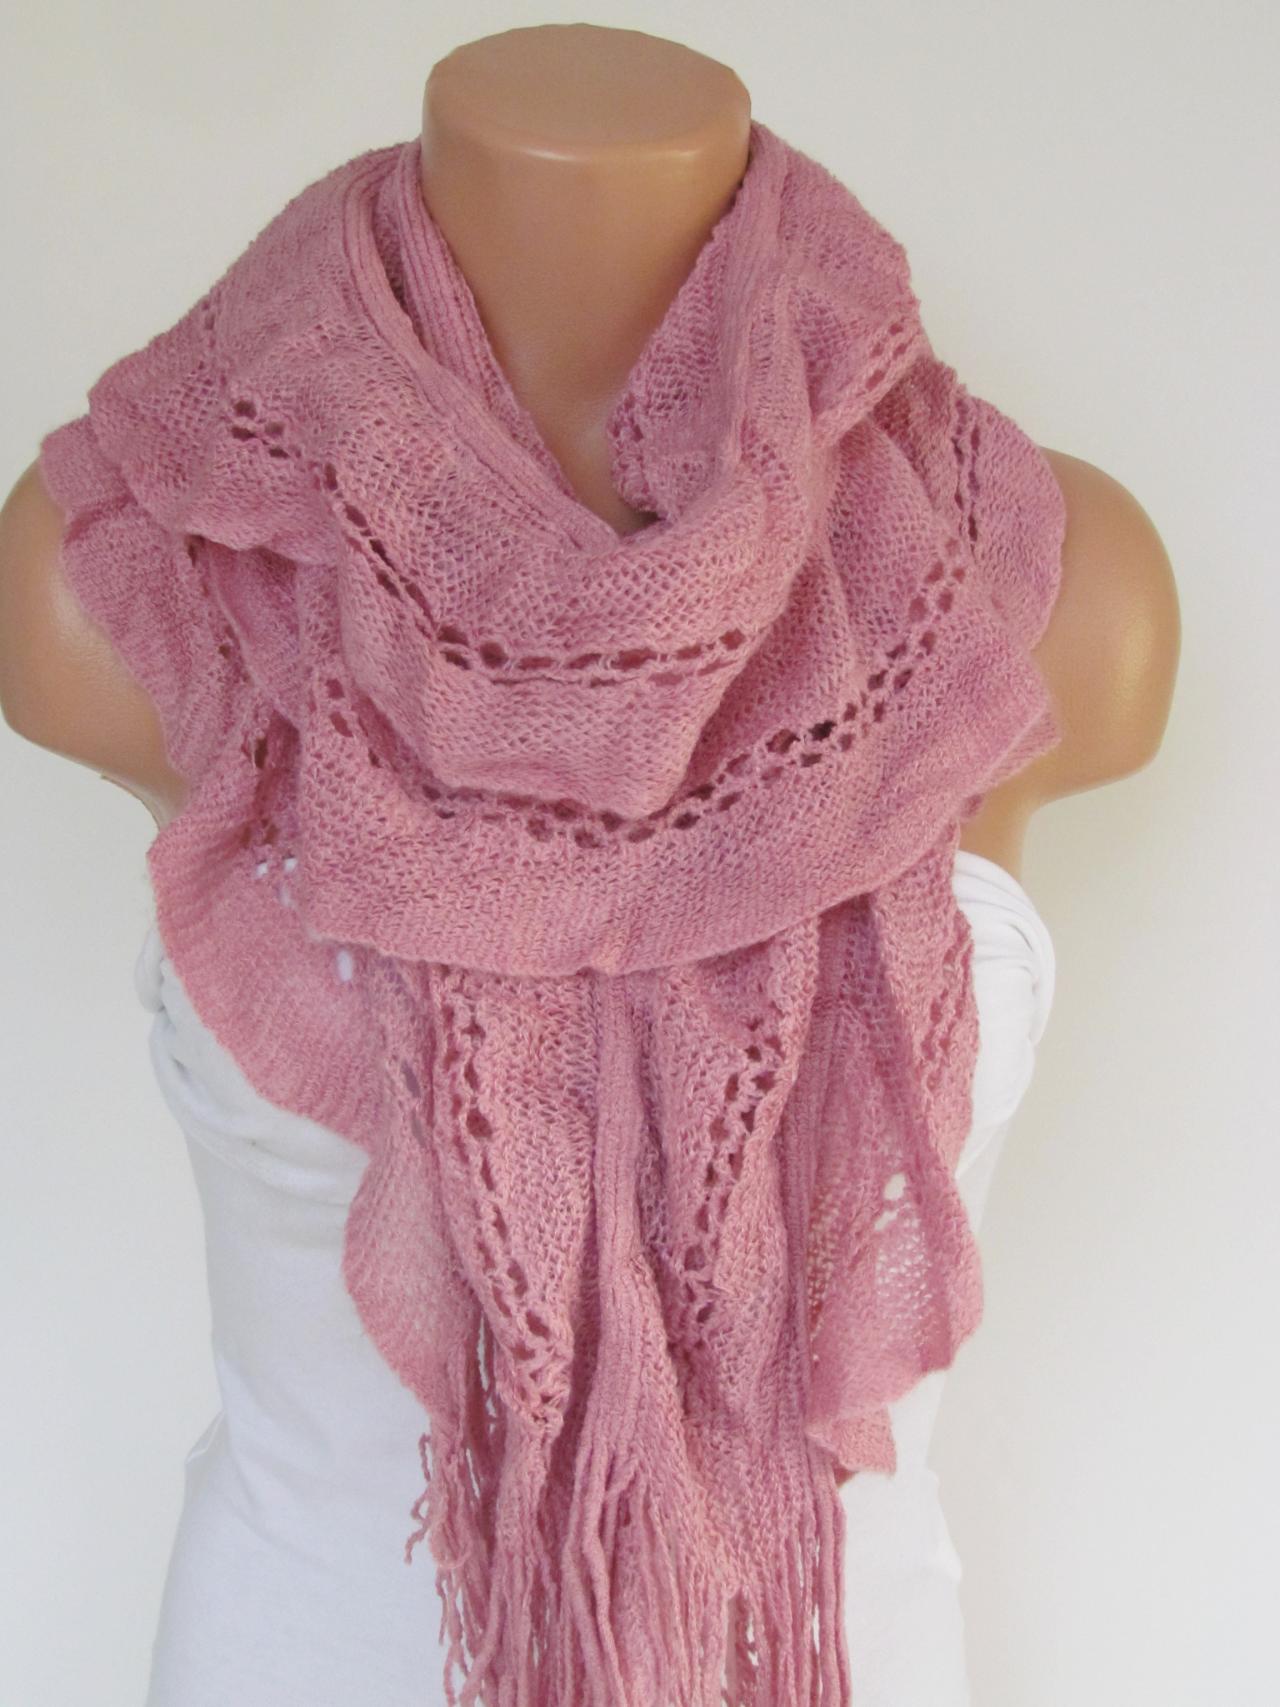 Knitted Shawl Scarf , Pink Scarf, Neck Warmer, Winter Accessories, Fall Fashion, Holiday Accossories,Gift For Valentines